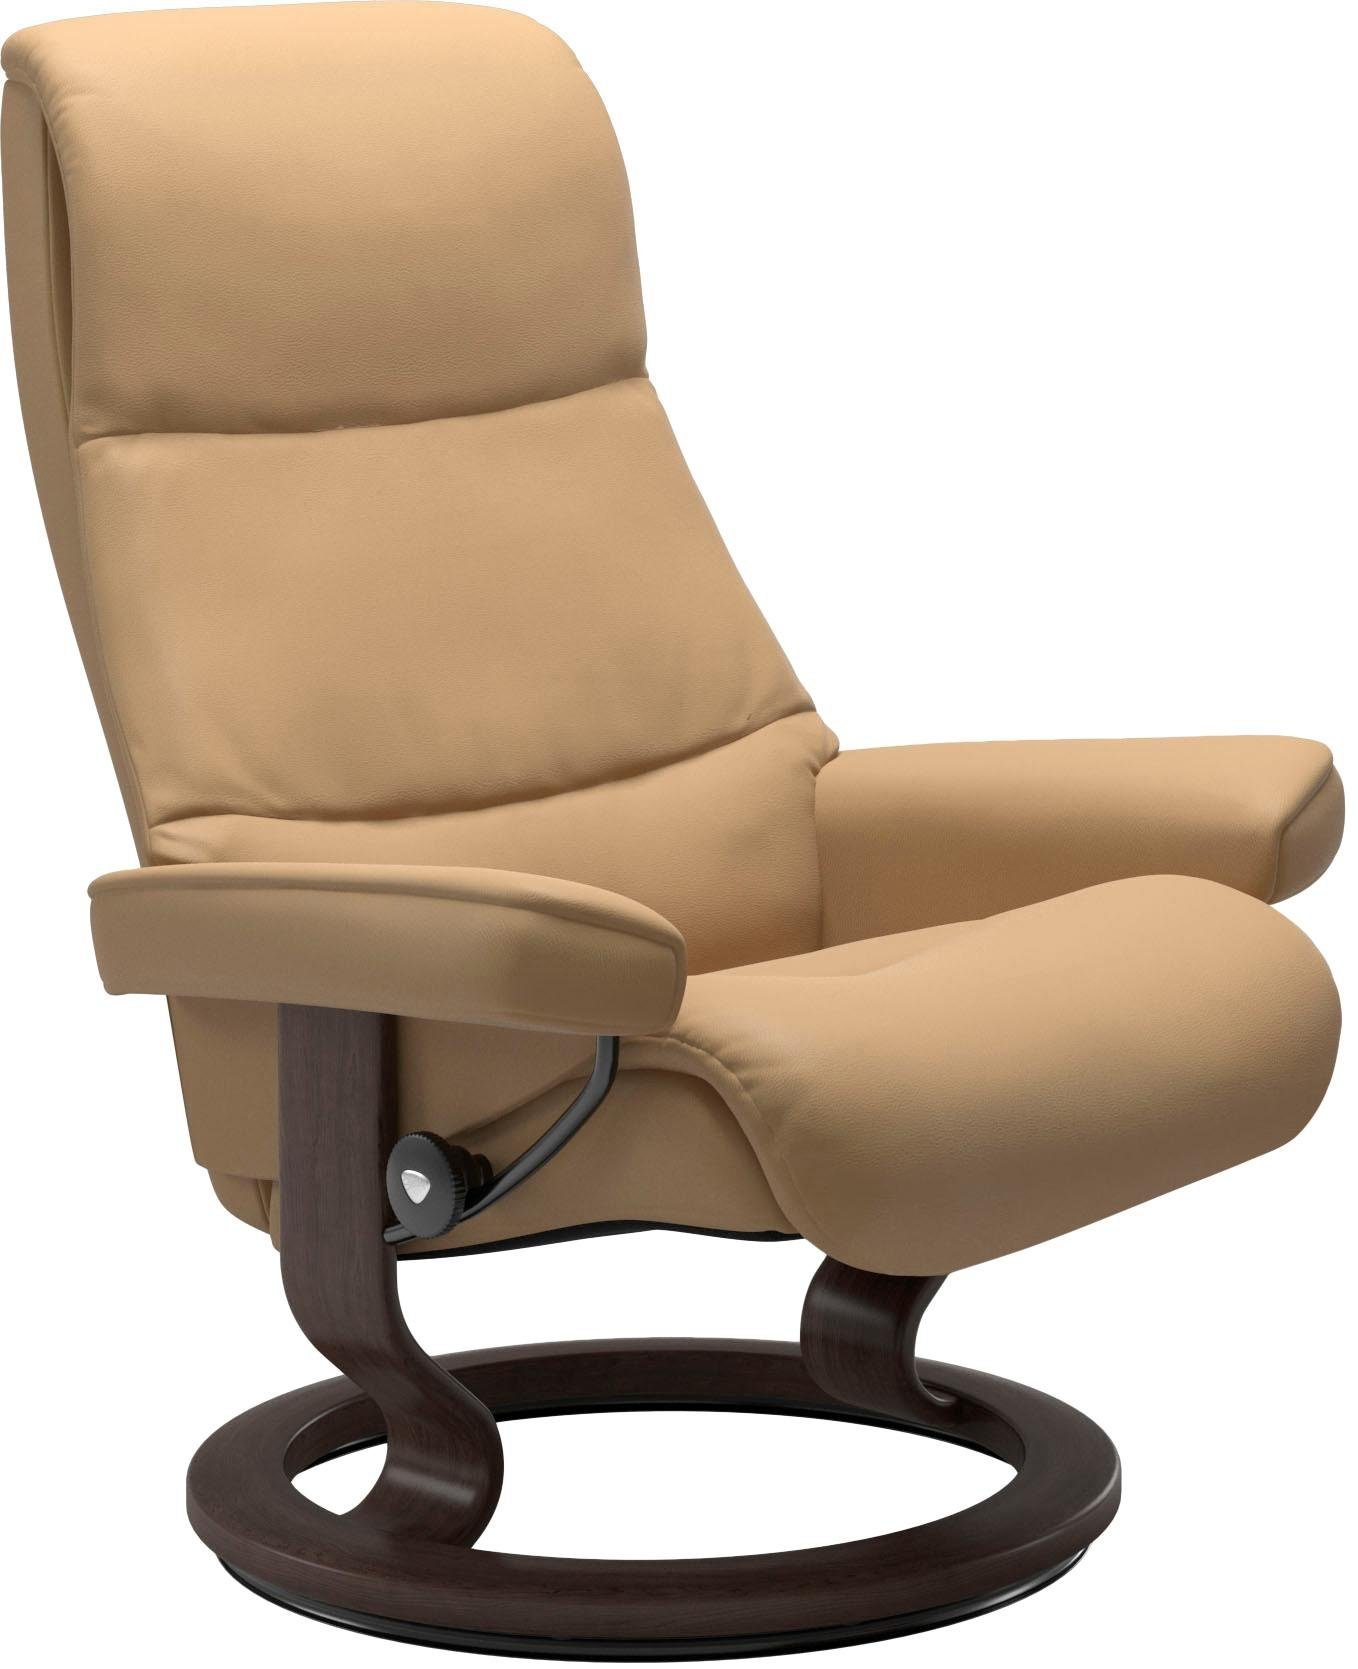 Größe Wenge Relaxsessel Stressless® mit Base, View, Classic M,Gestell